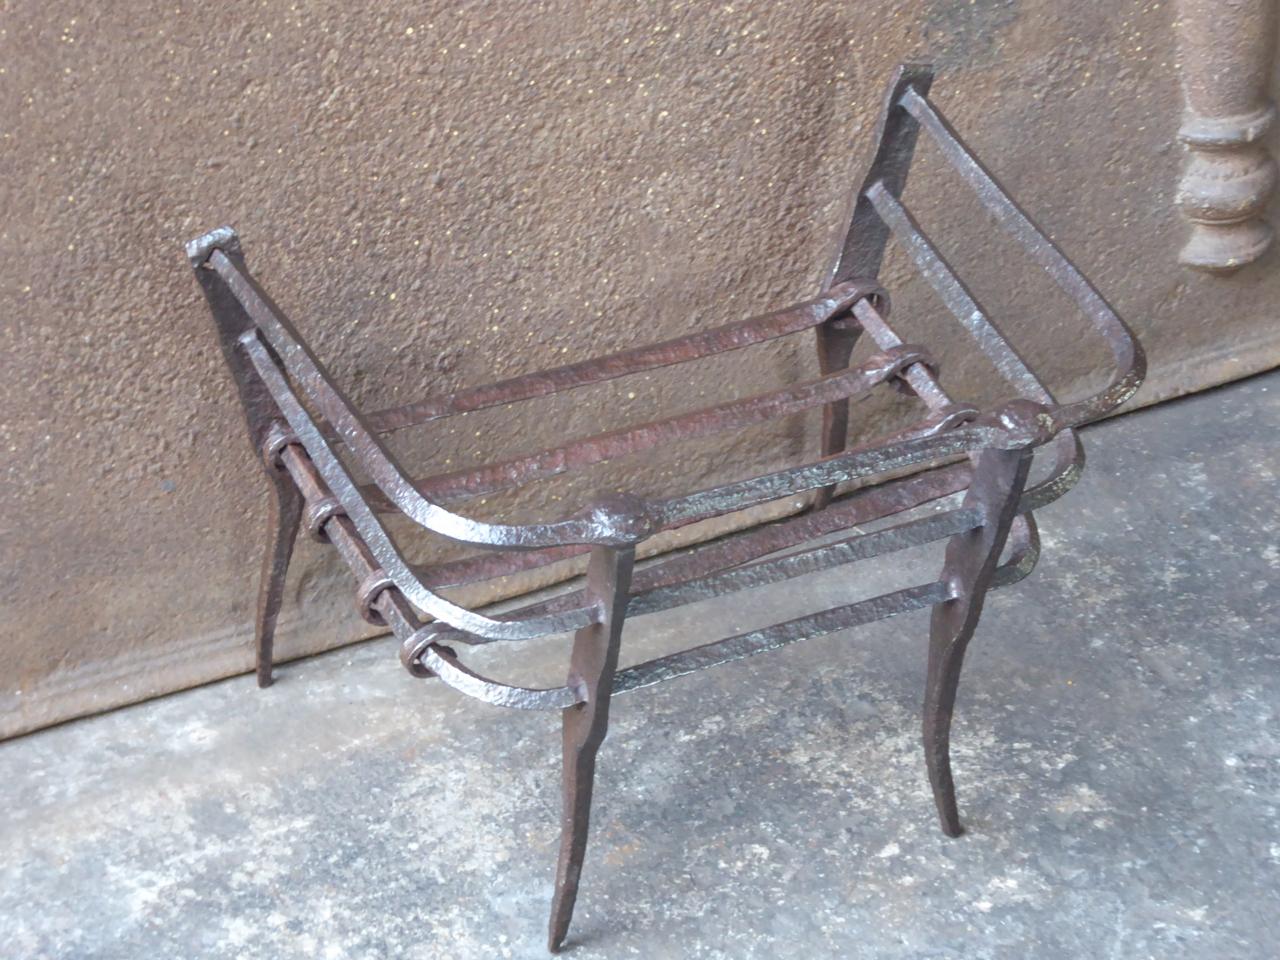 Forged Dutch Gothic Fireplace Grate or Fire Basket, 17th Century